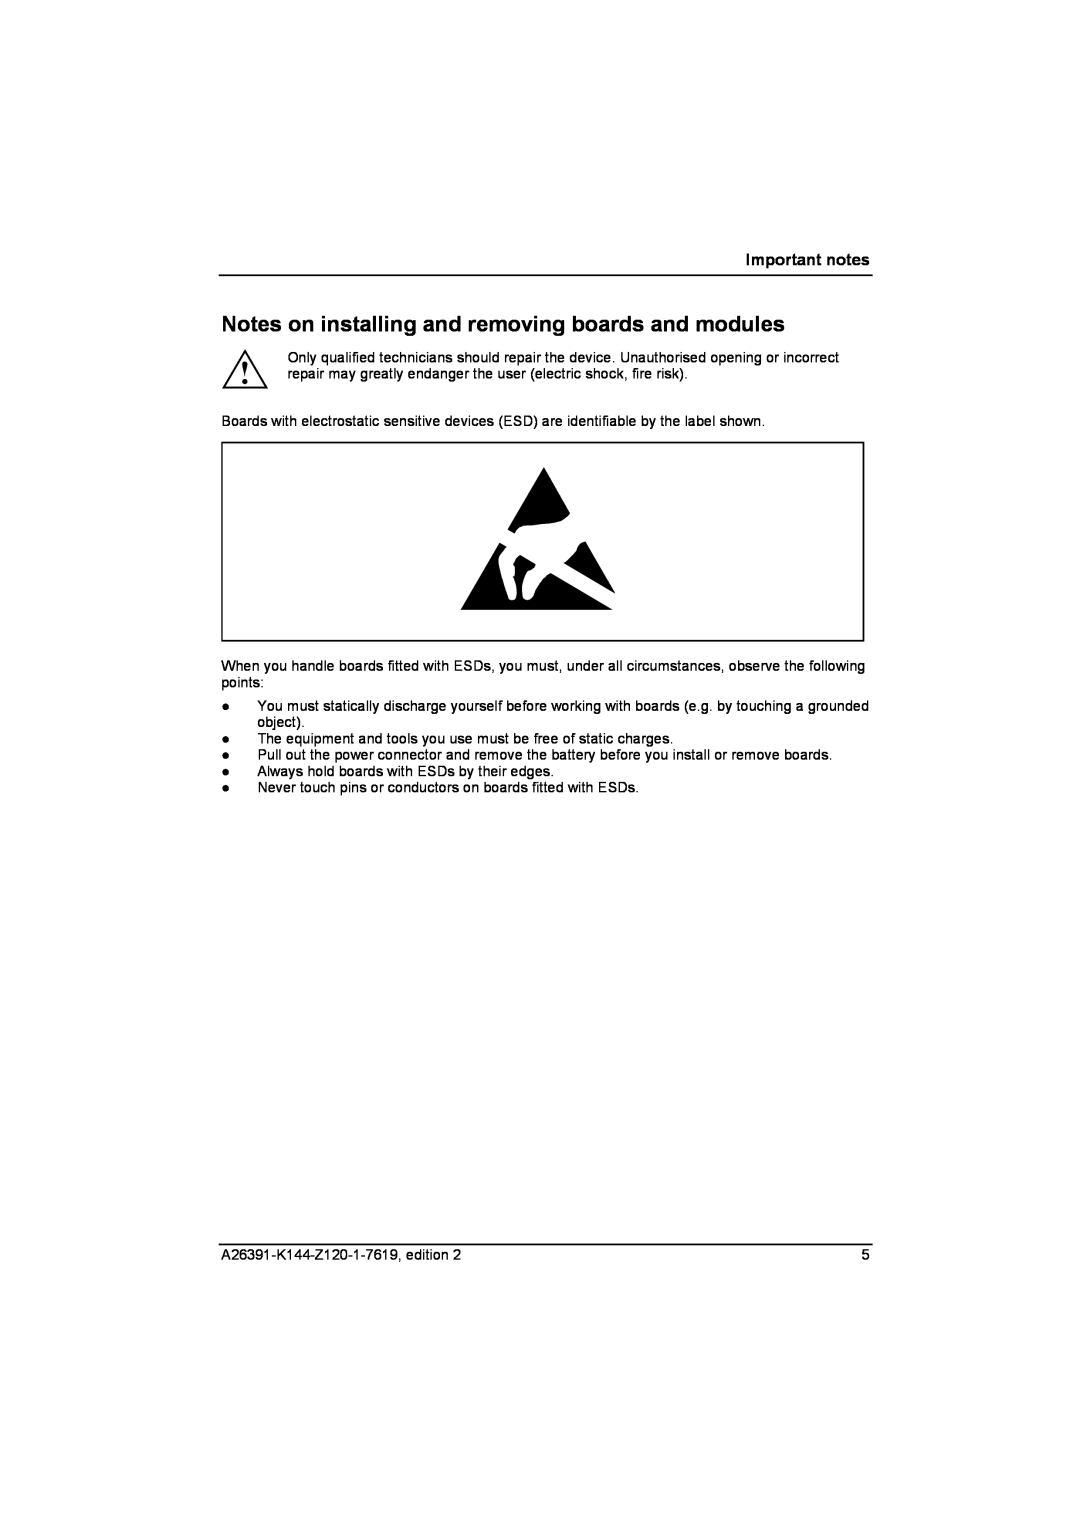 Fujitsu S SERIES manual Notes on installing and removing boards and modules, Important notes 